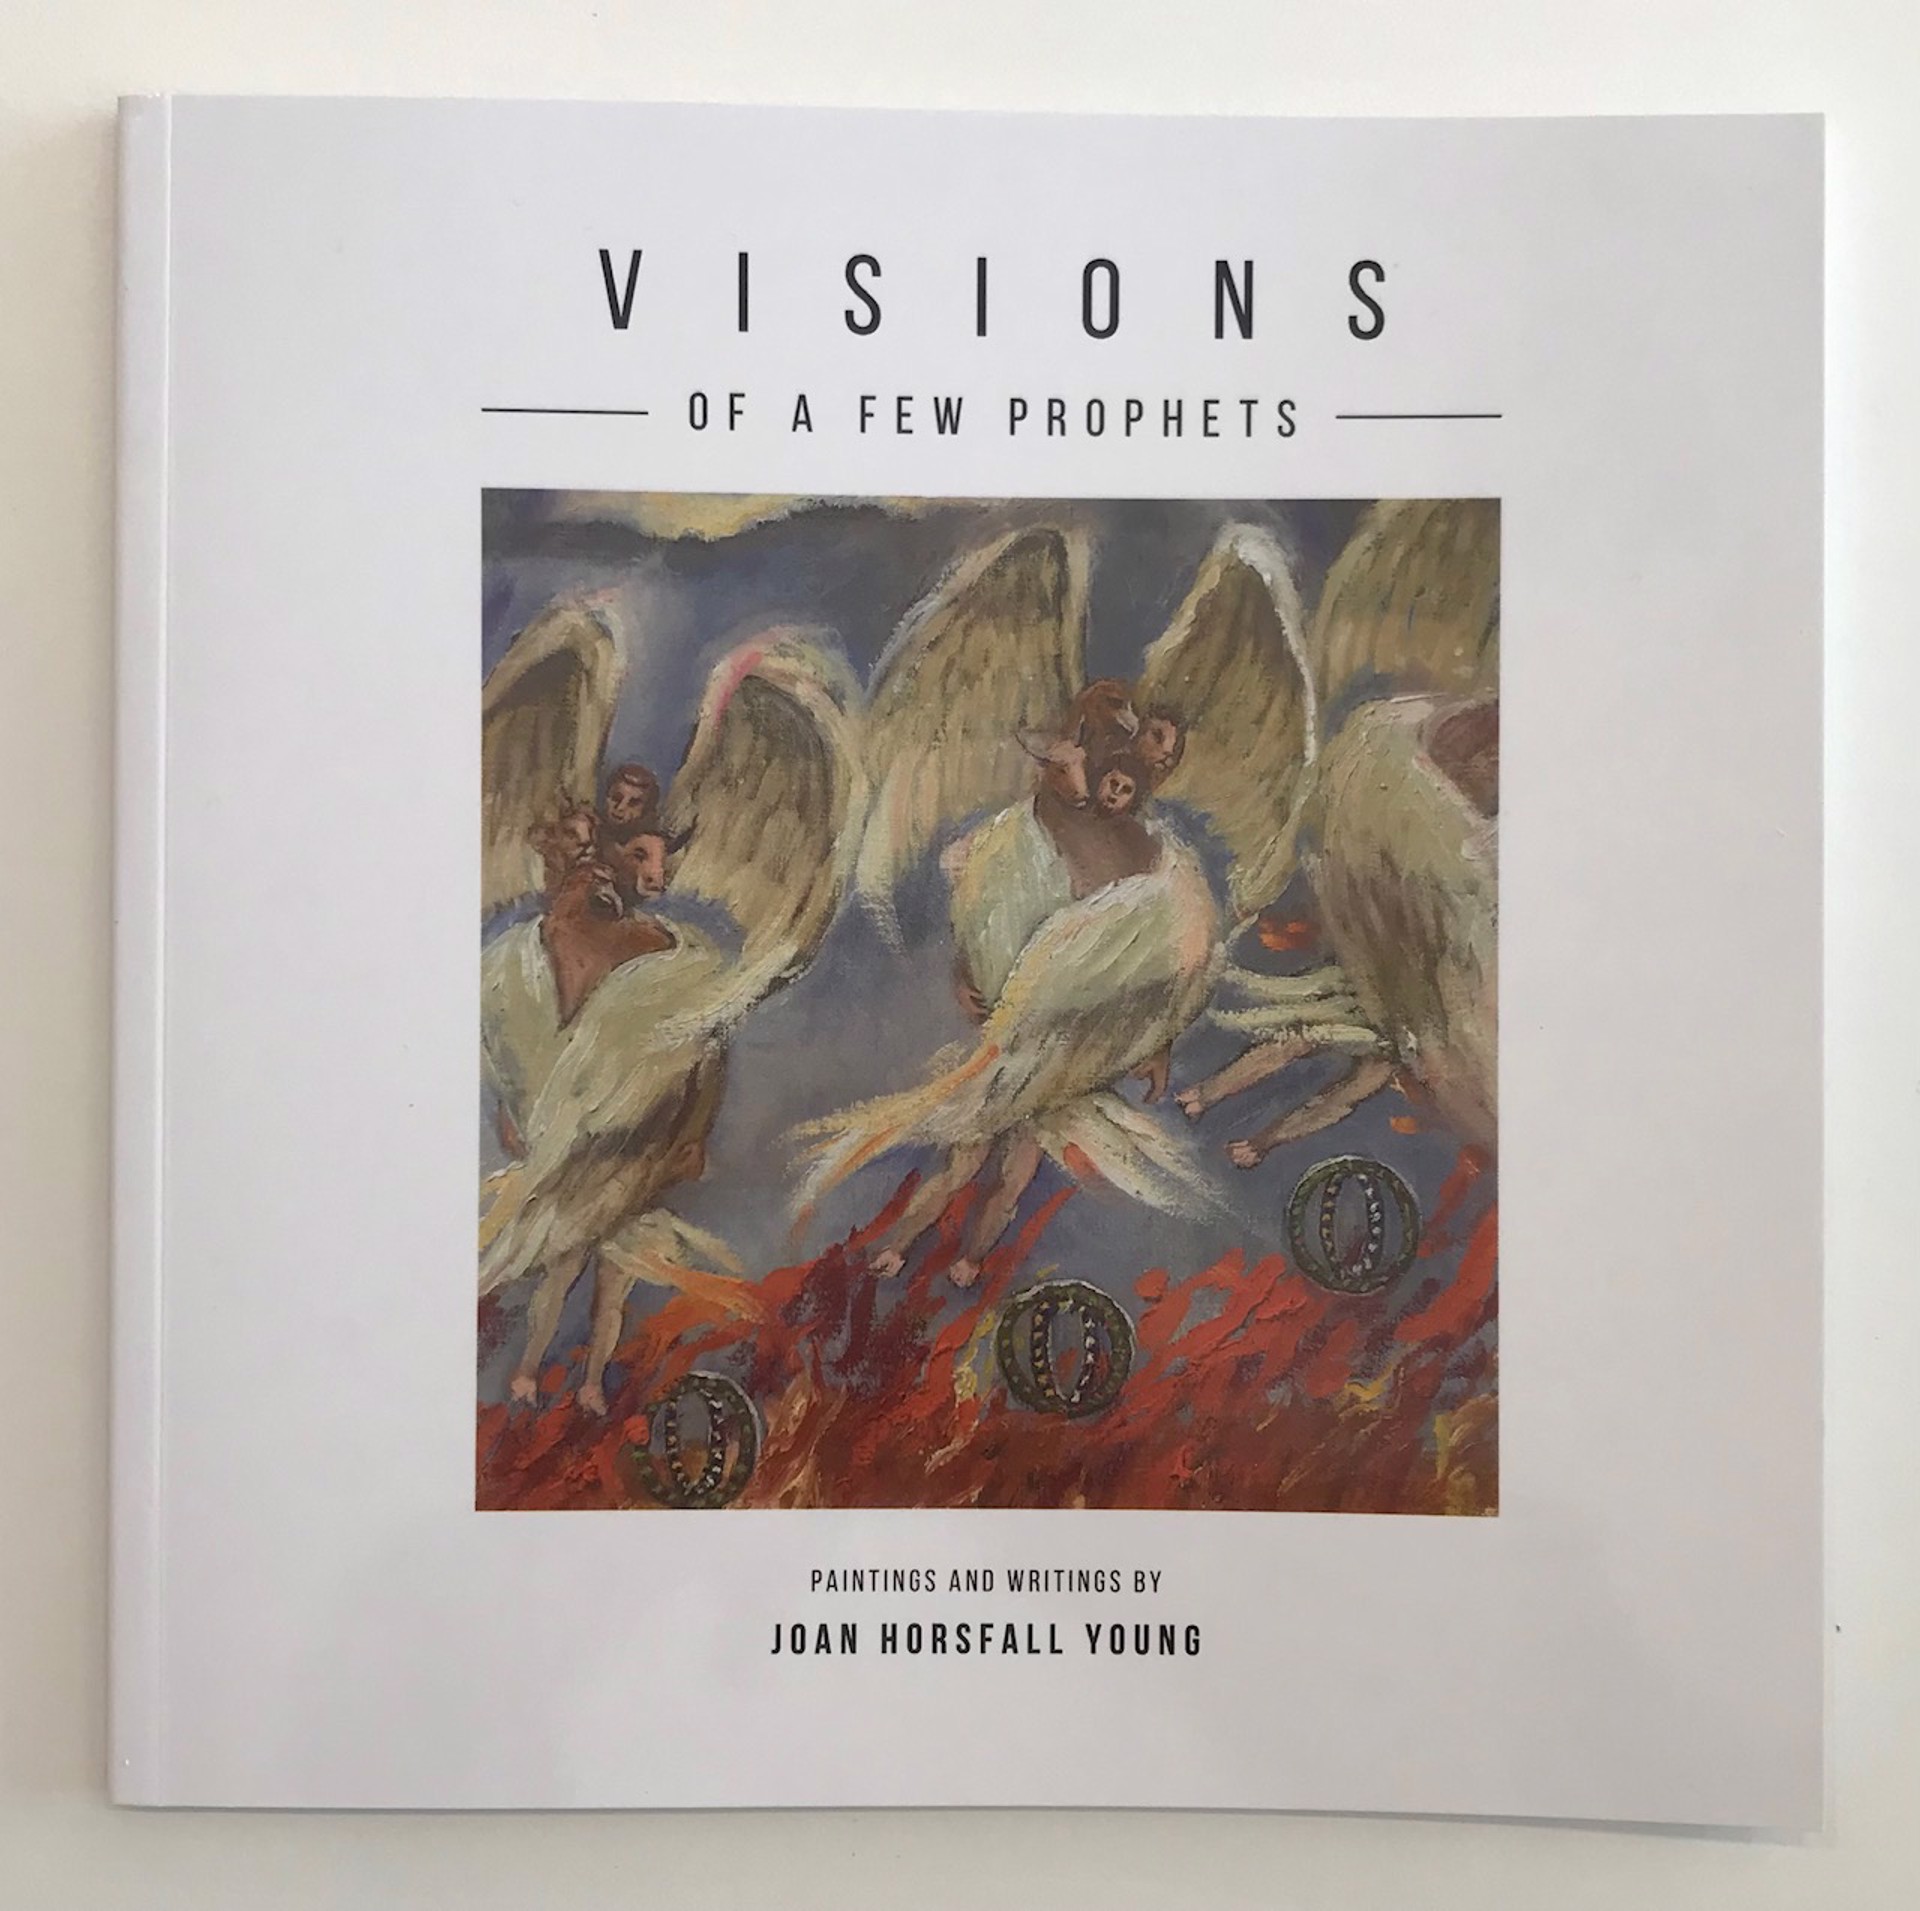 Visions of a Few Prophets by Joan Horsfall Young